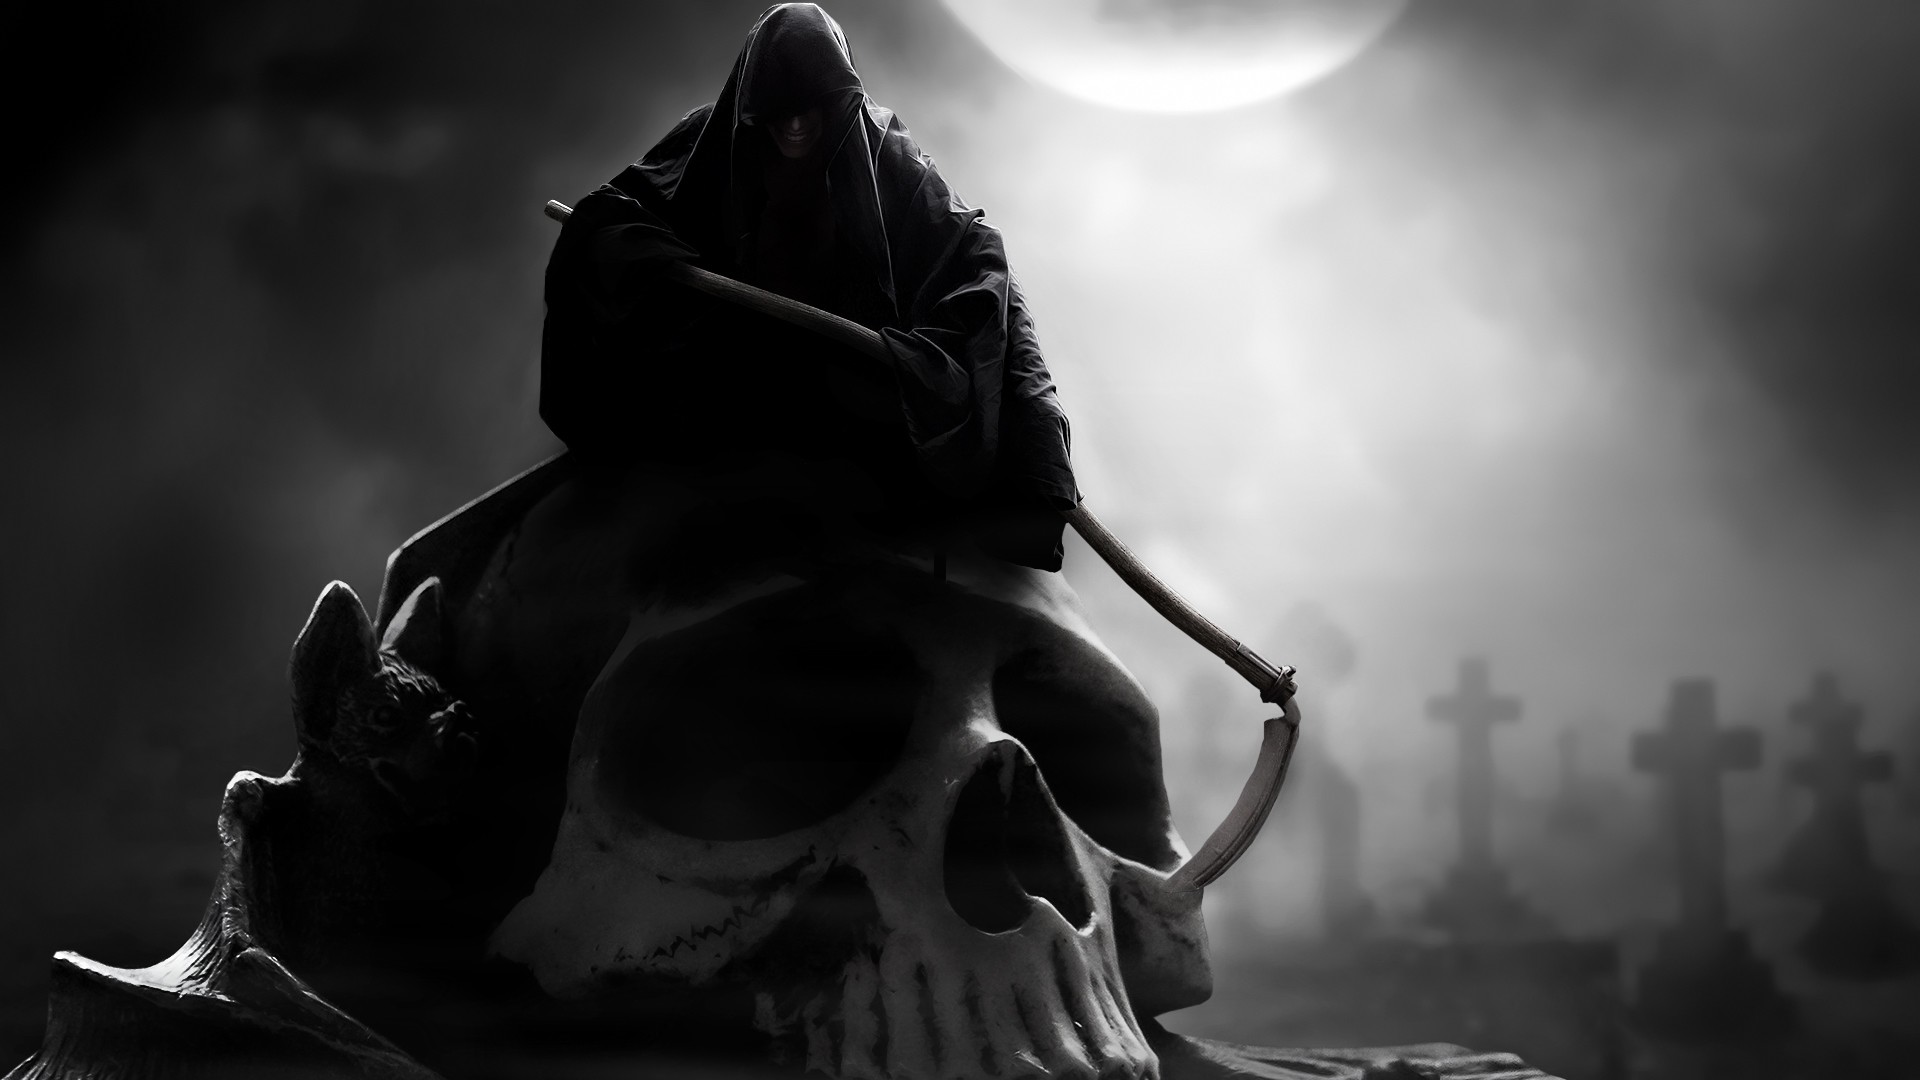 1920x1080 Collection of Grim Reaper Wallpaper Layouts Backgrounds on Grim Reaper  Backgrounds Wallpapers)